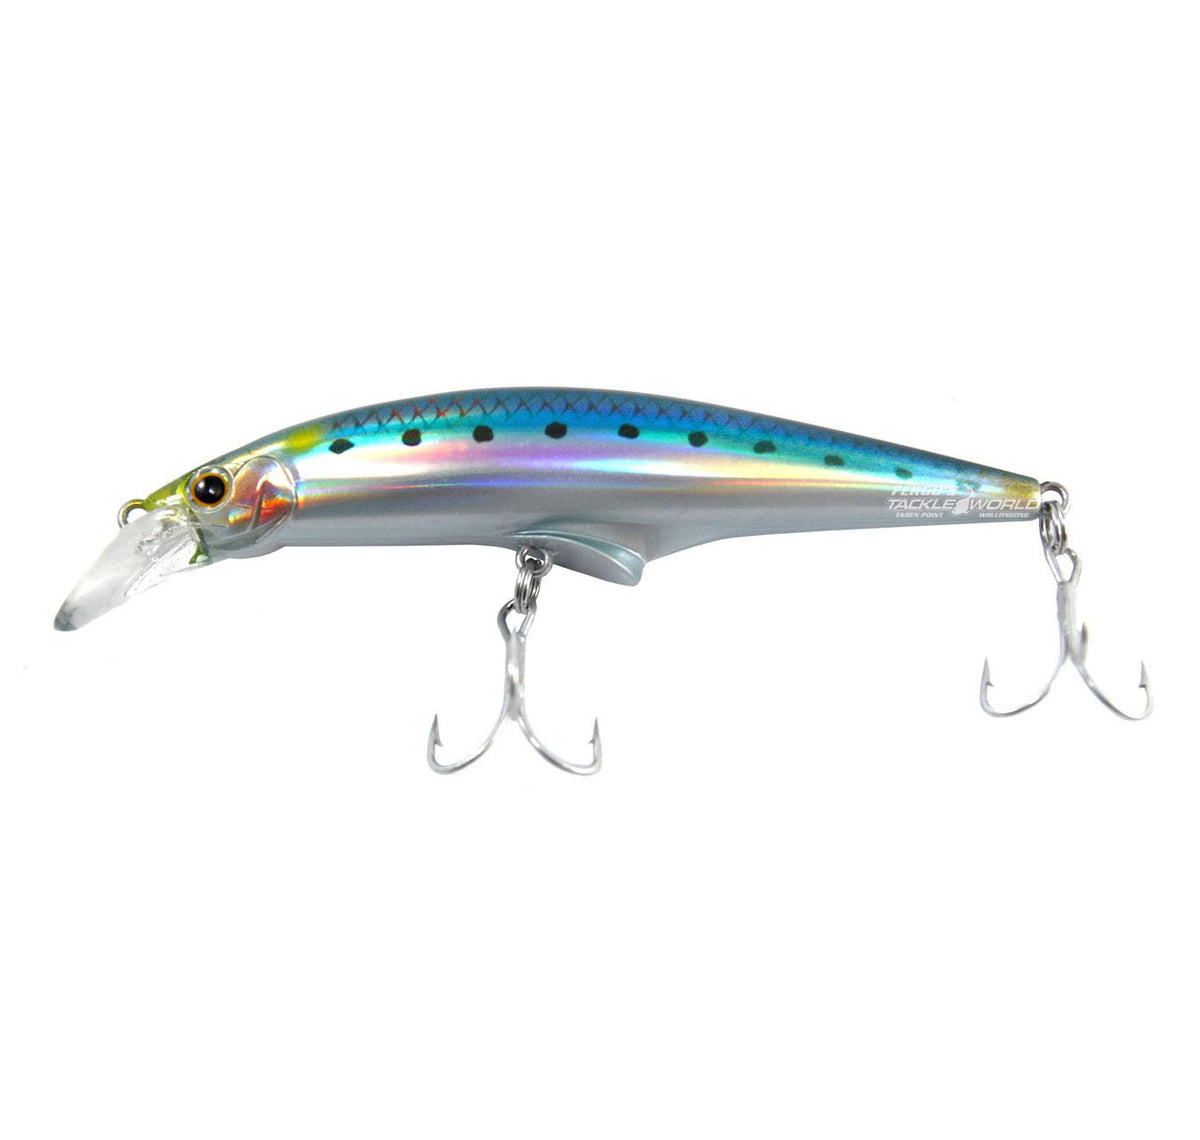 Jackson G-Control 28 Lure Col LIW